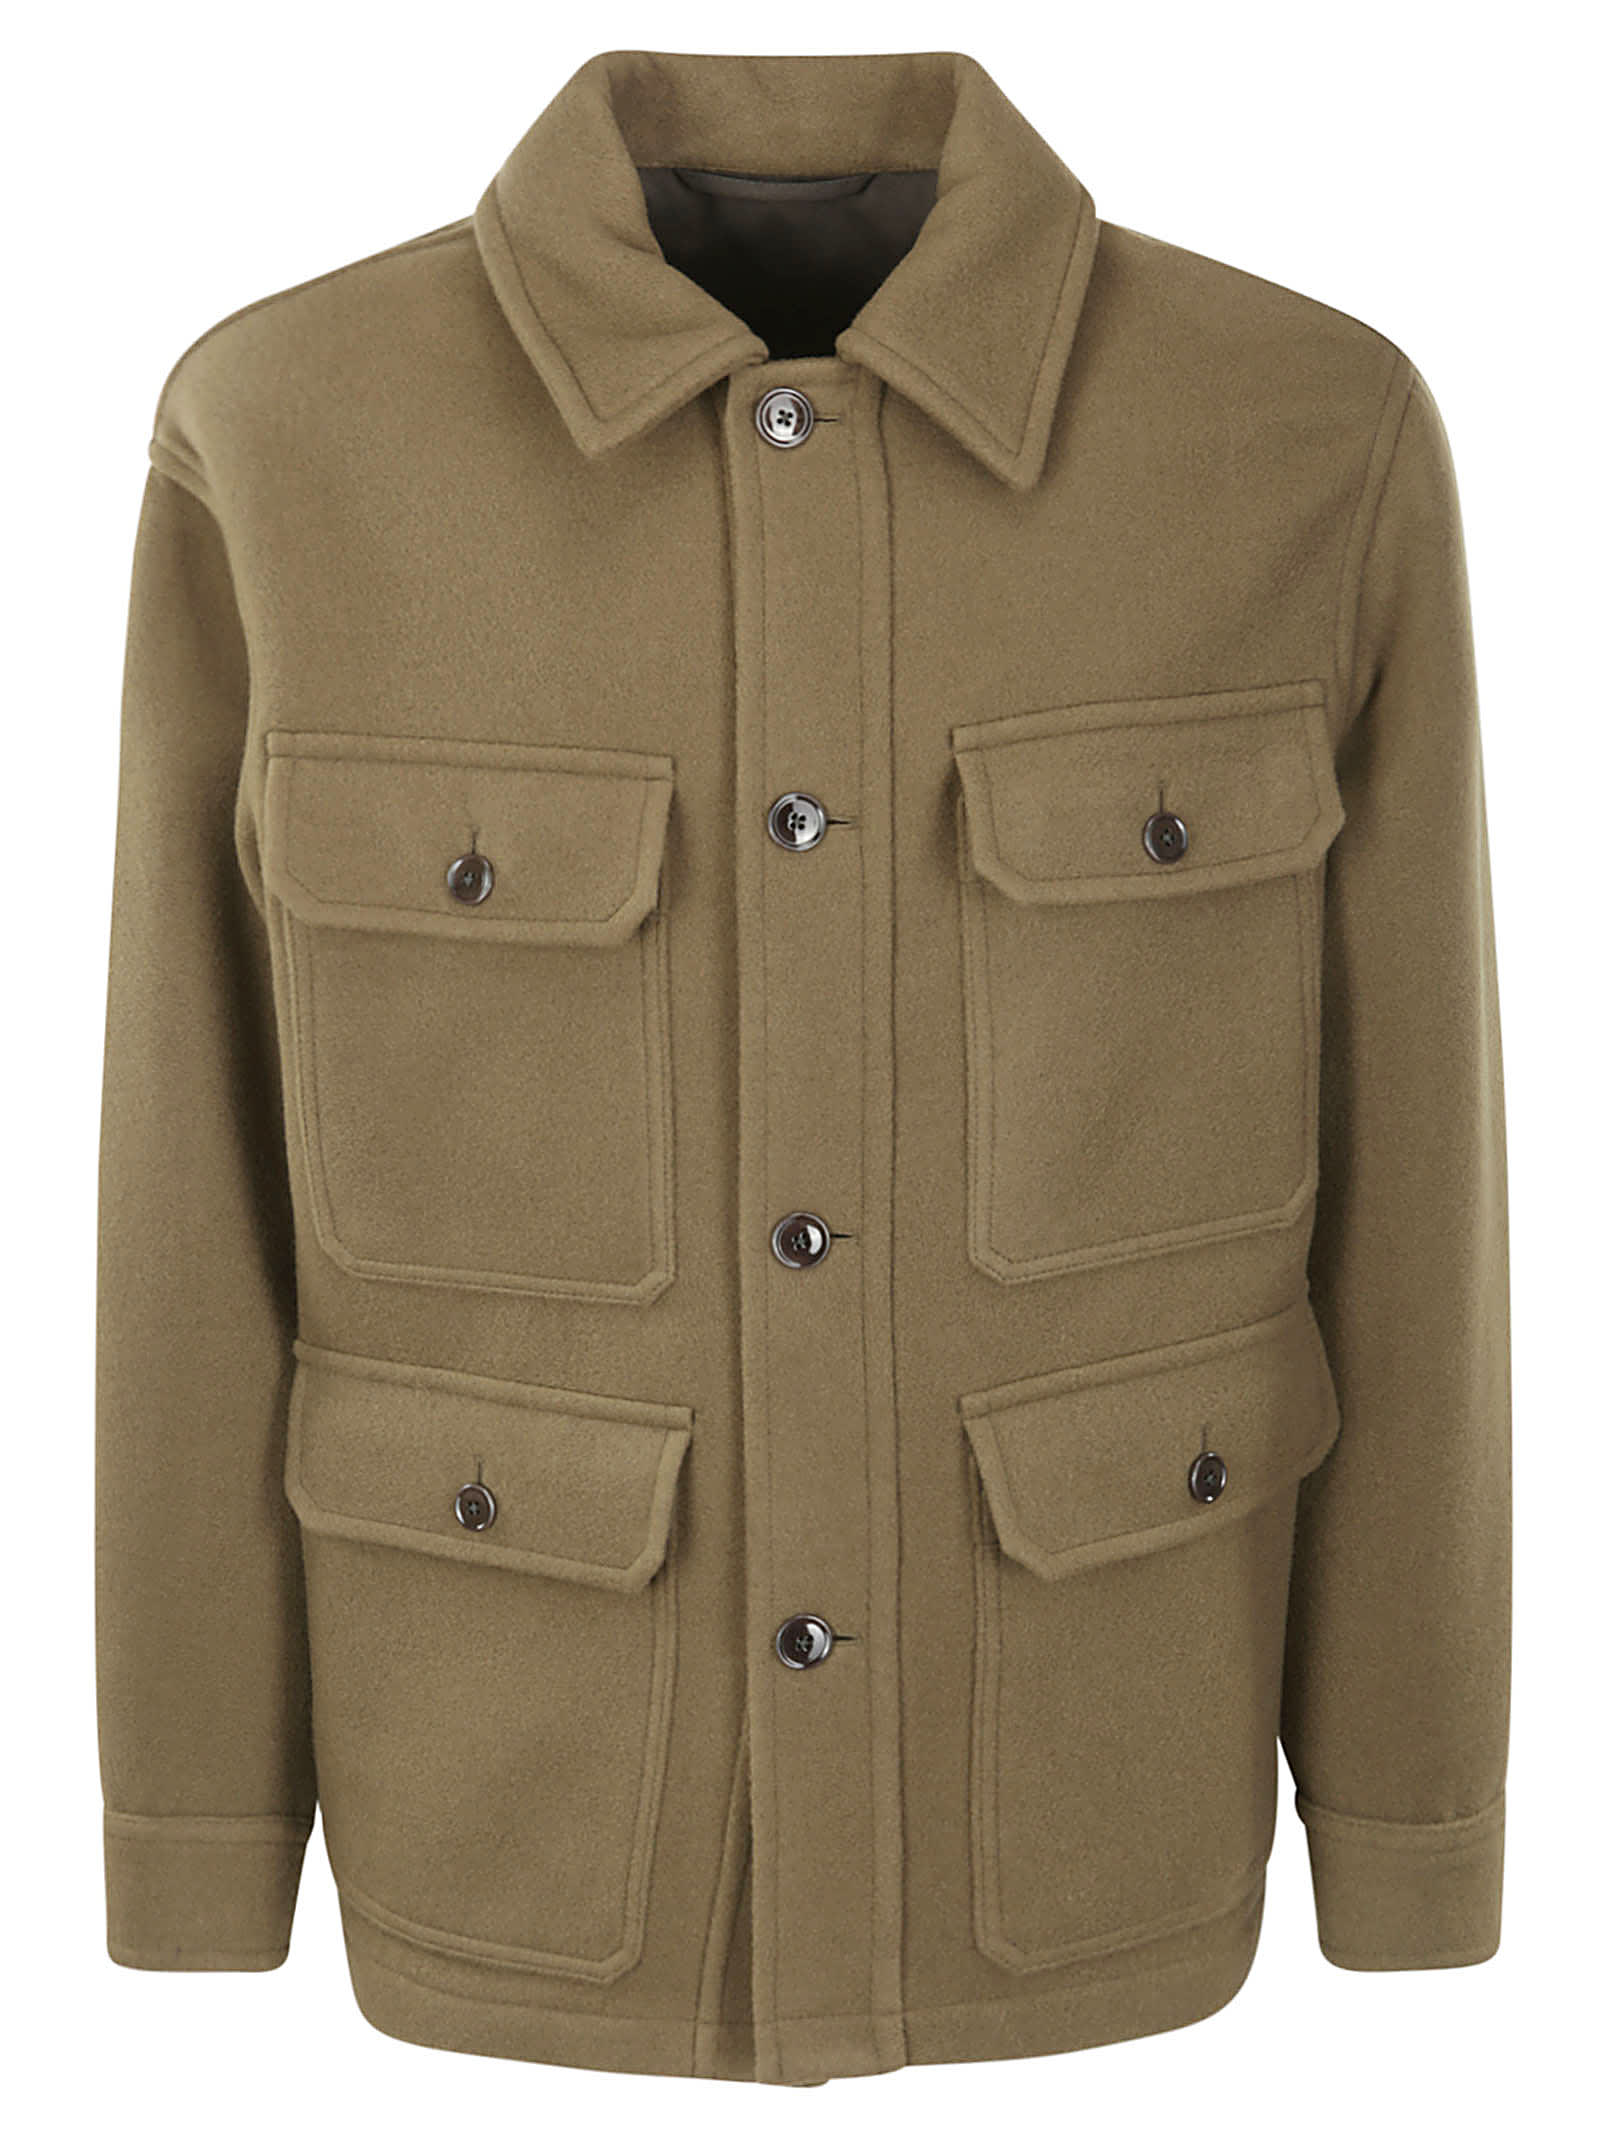 LEMAIRE HUNTING JACKET